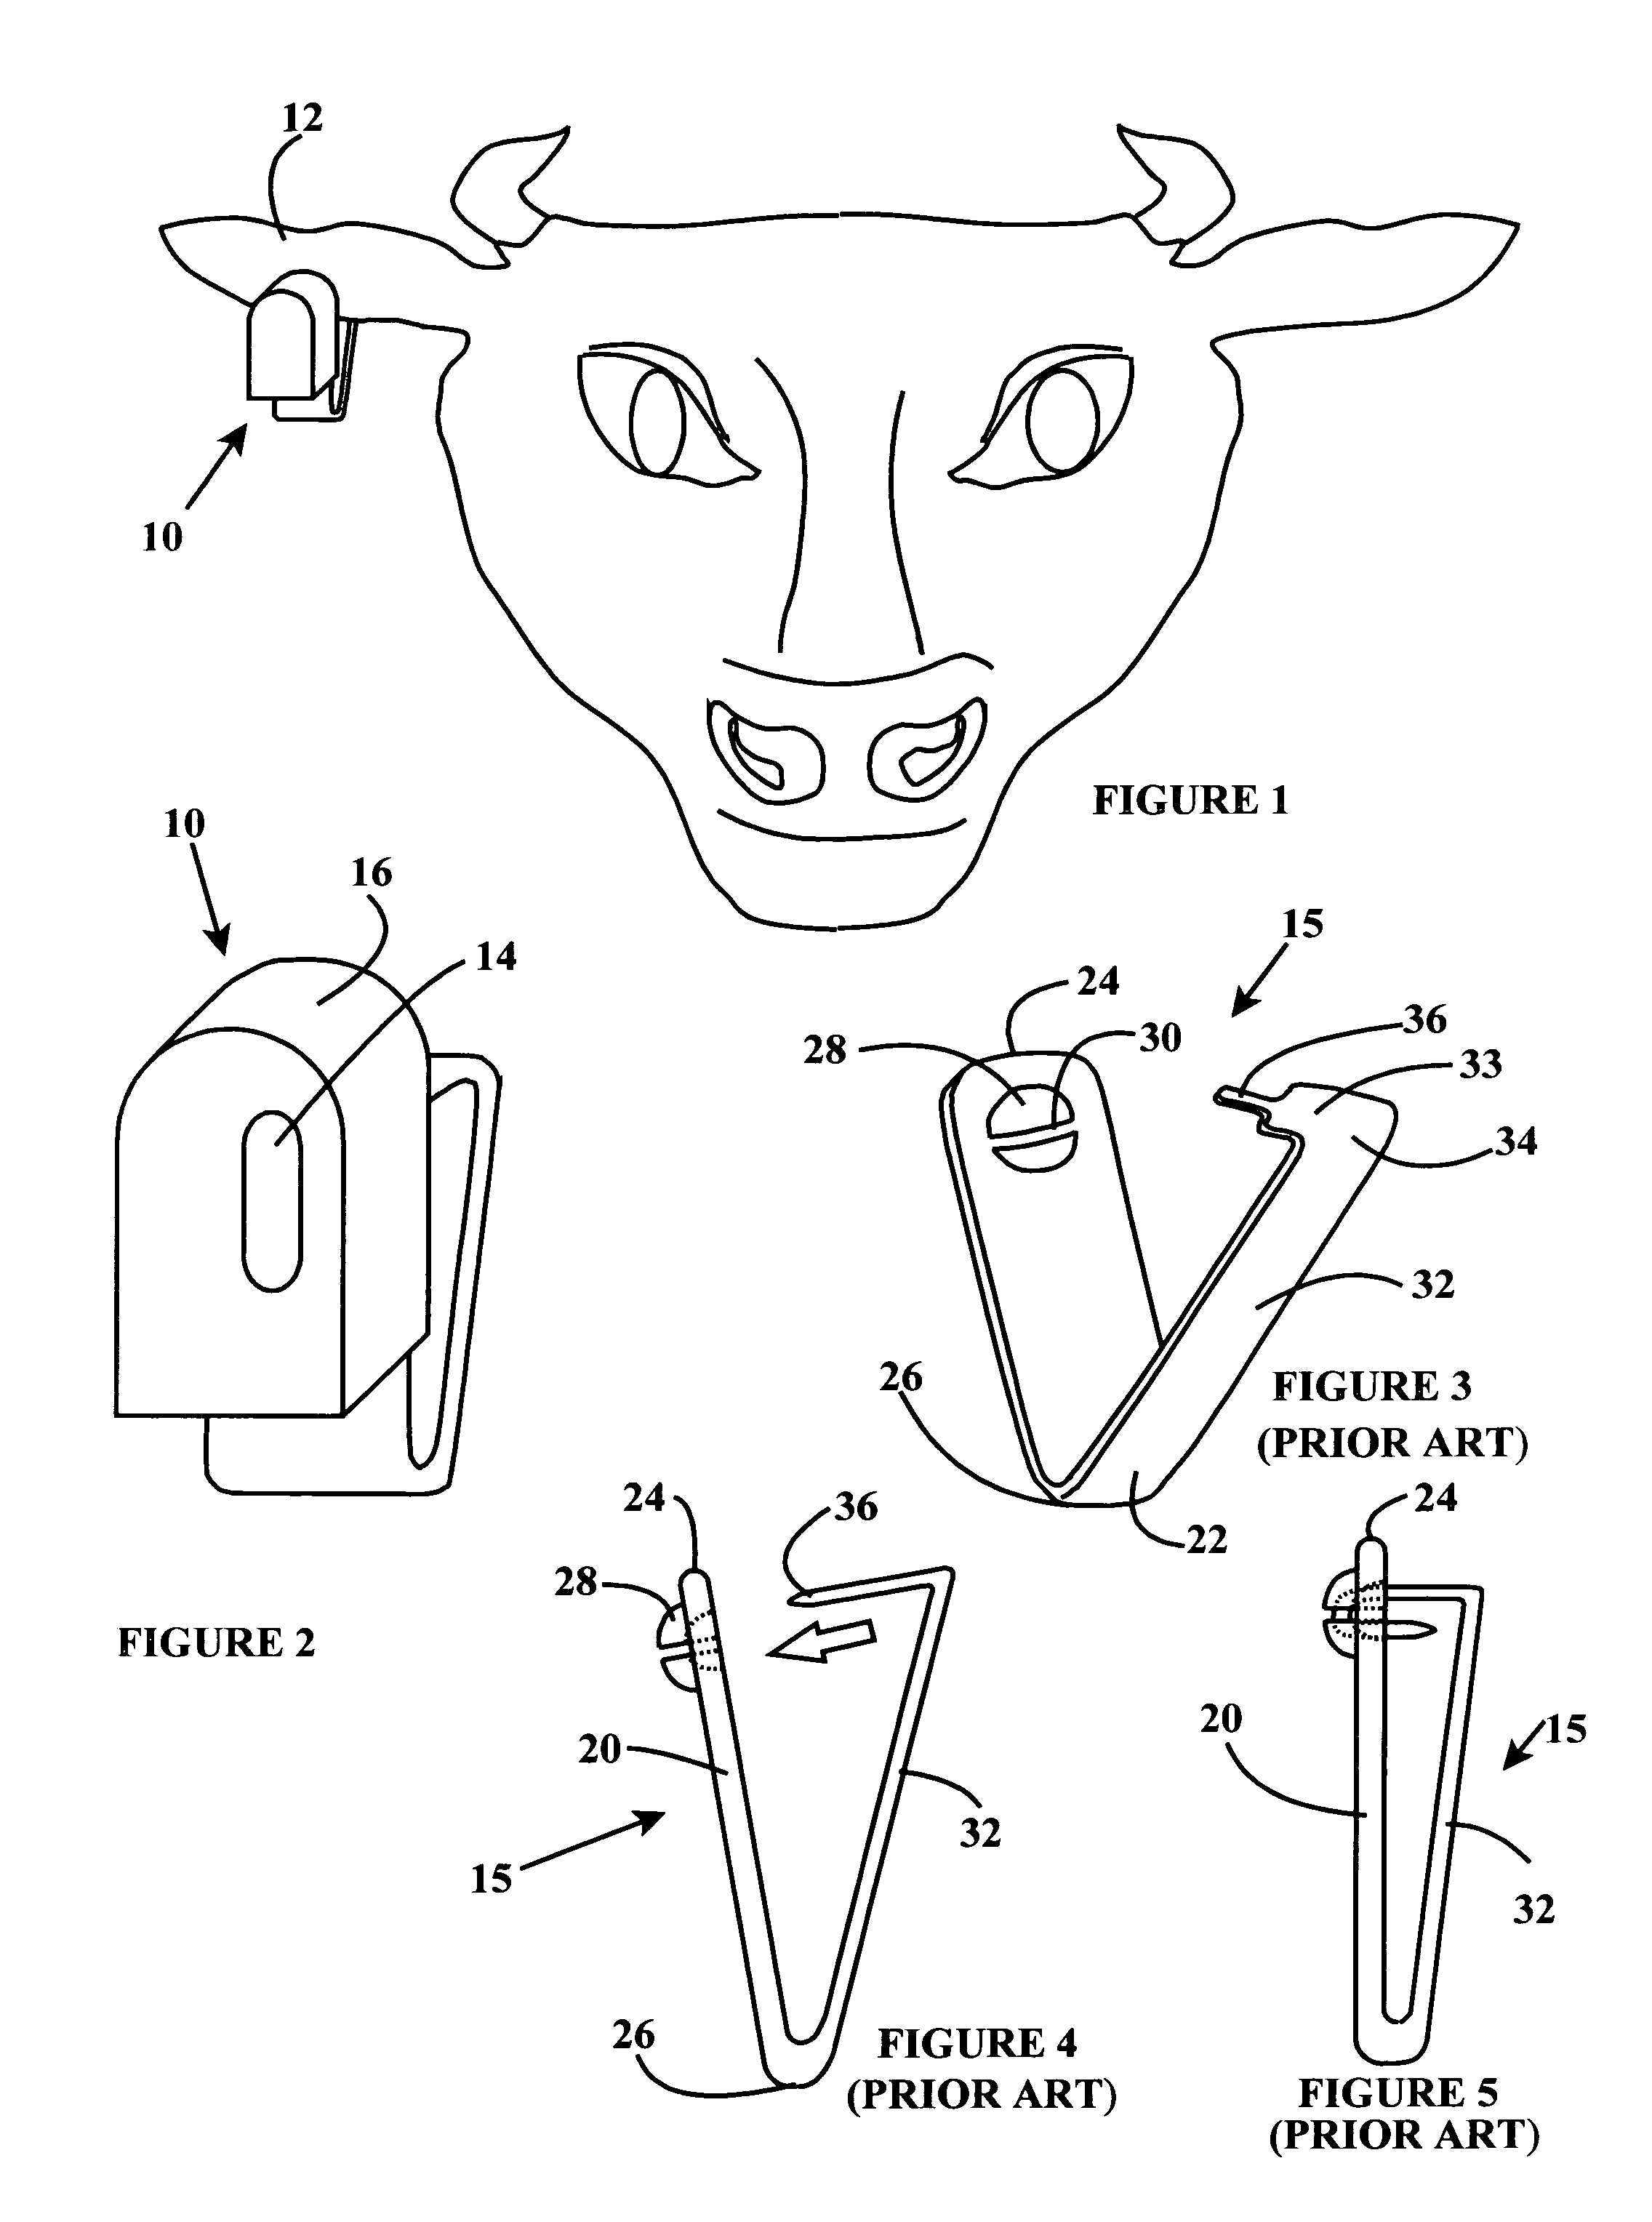 Metal ear tag with electronic identification device